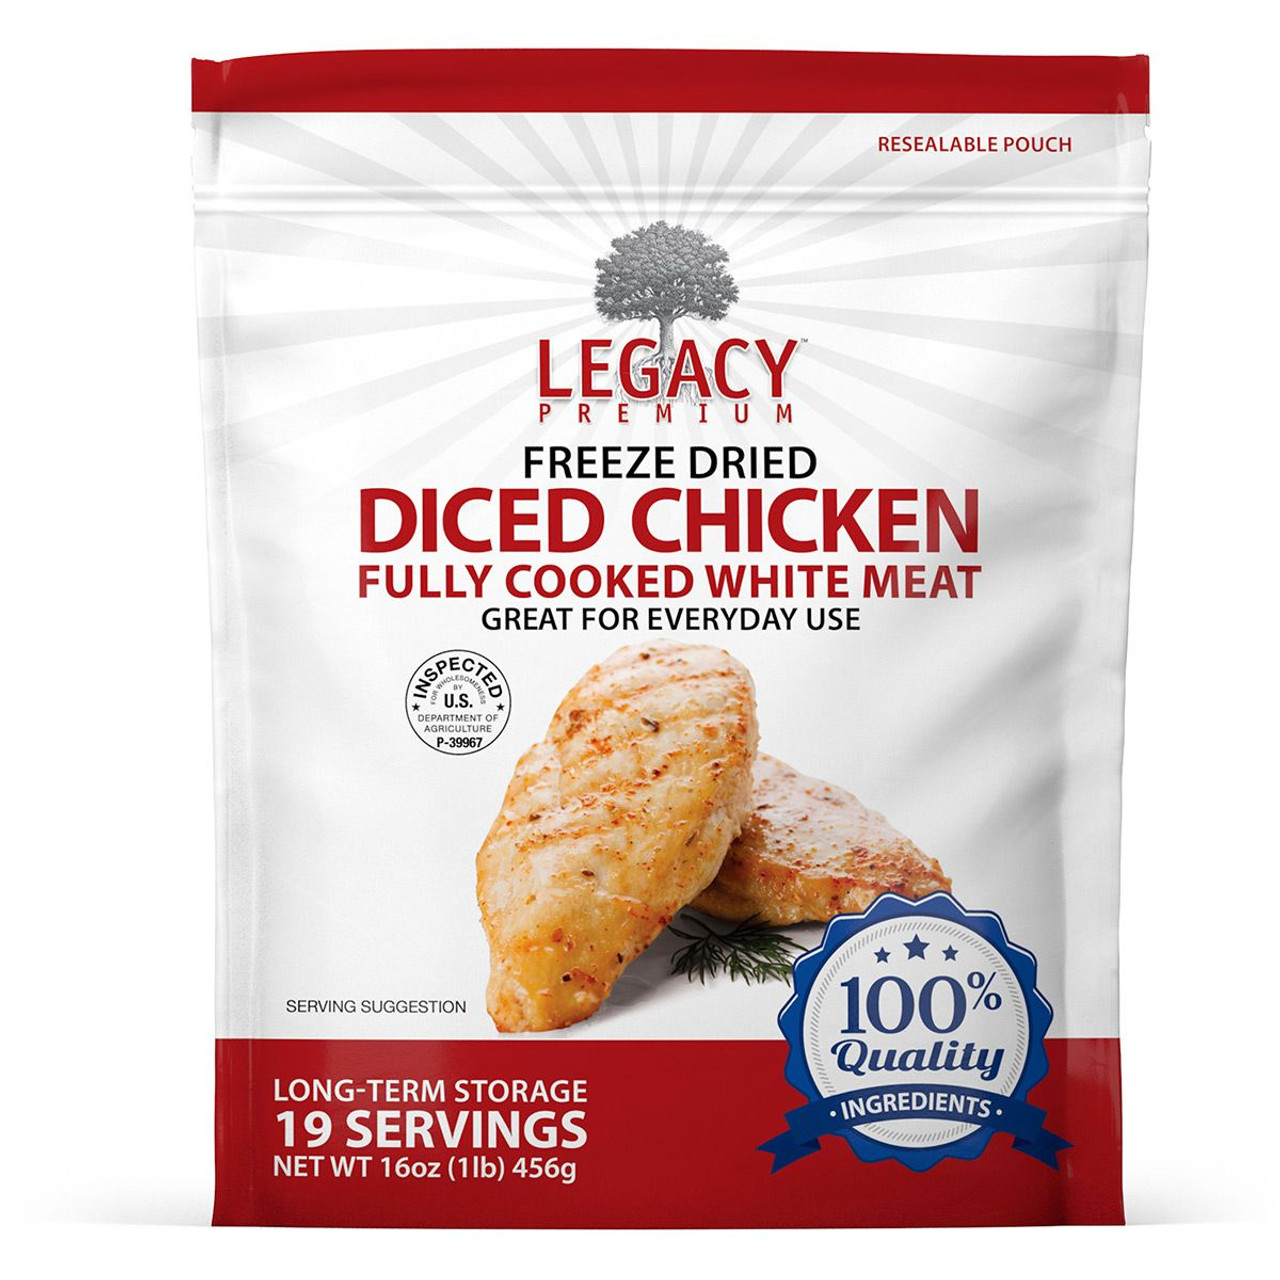 https://cdn11.bigcommerce.com/s-tumf4kk1l4/images/stencil/1280x1280/products/3665/6662/legacy-freeze-dried-chicken-pouch-2__30245.1640716769.jpg?c=1?imbypass=on